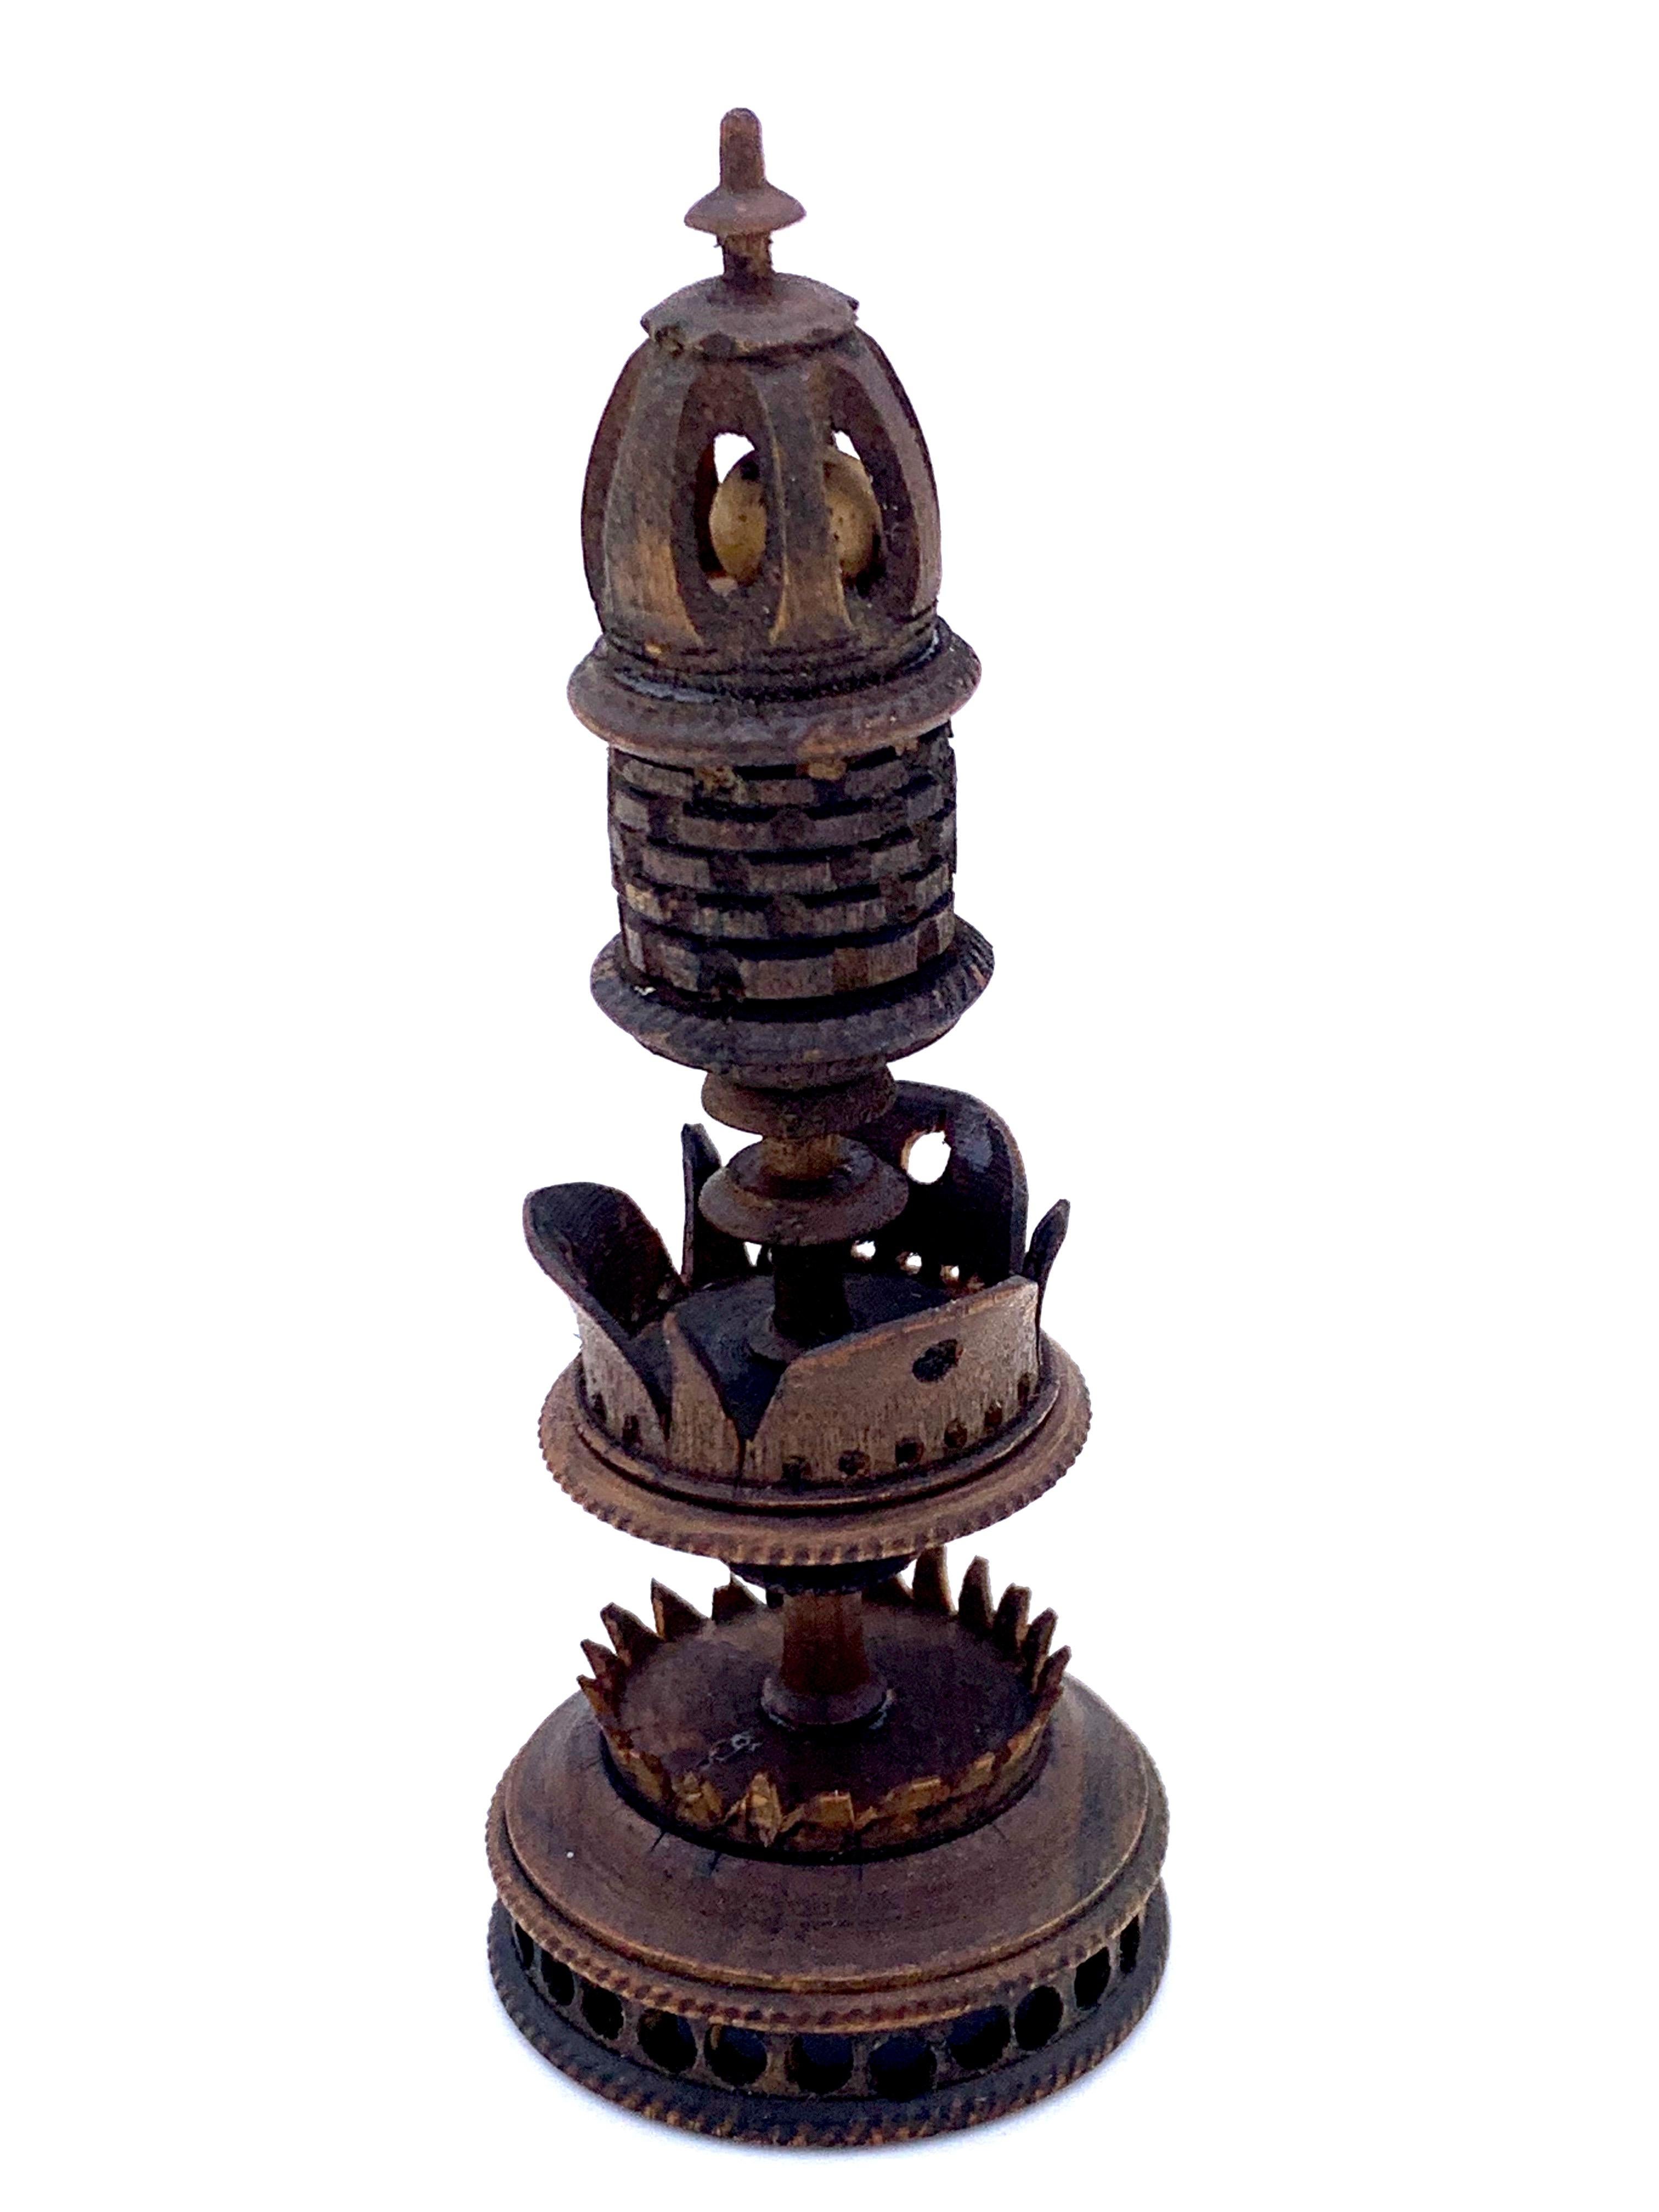 Leather Antique 1850 Chess Game Maple Pear Wood Carving Erzgebirge Saxony